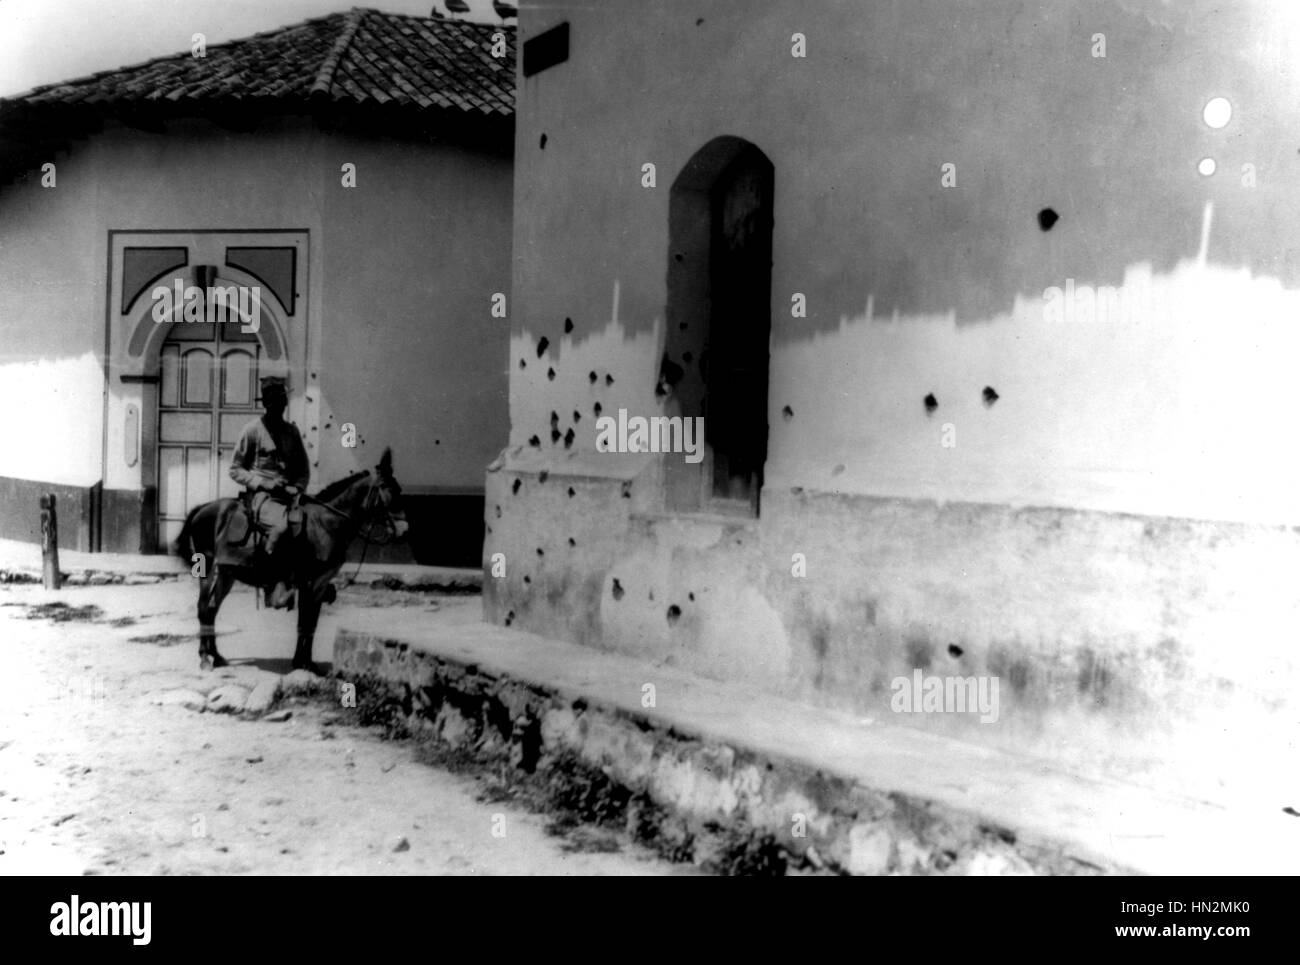 Wall pocked with bullet holes during machine gun fire by Sandino's rebel forces Around 1916-1920 Nicaragua Washington. National archives Stock Photo